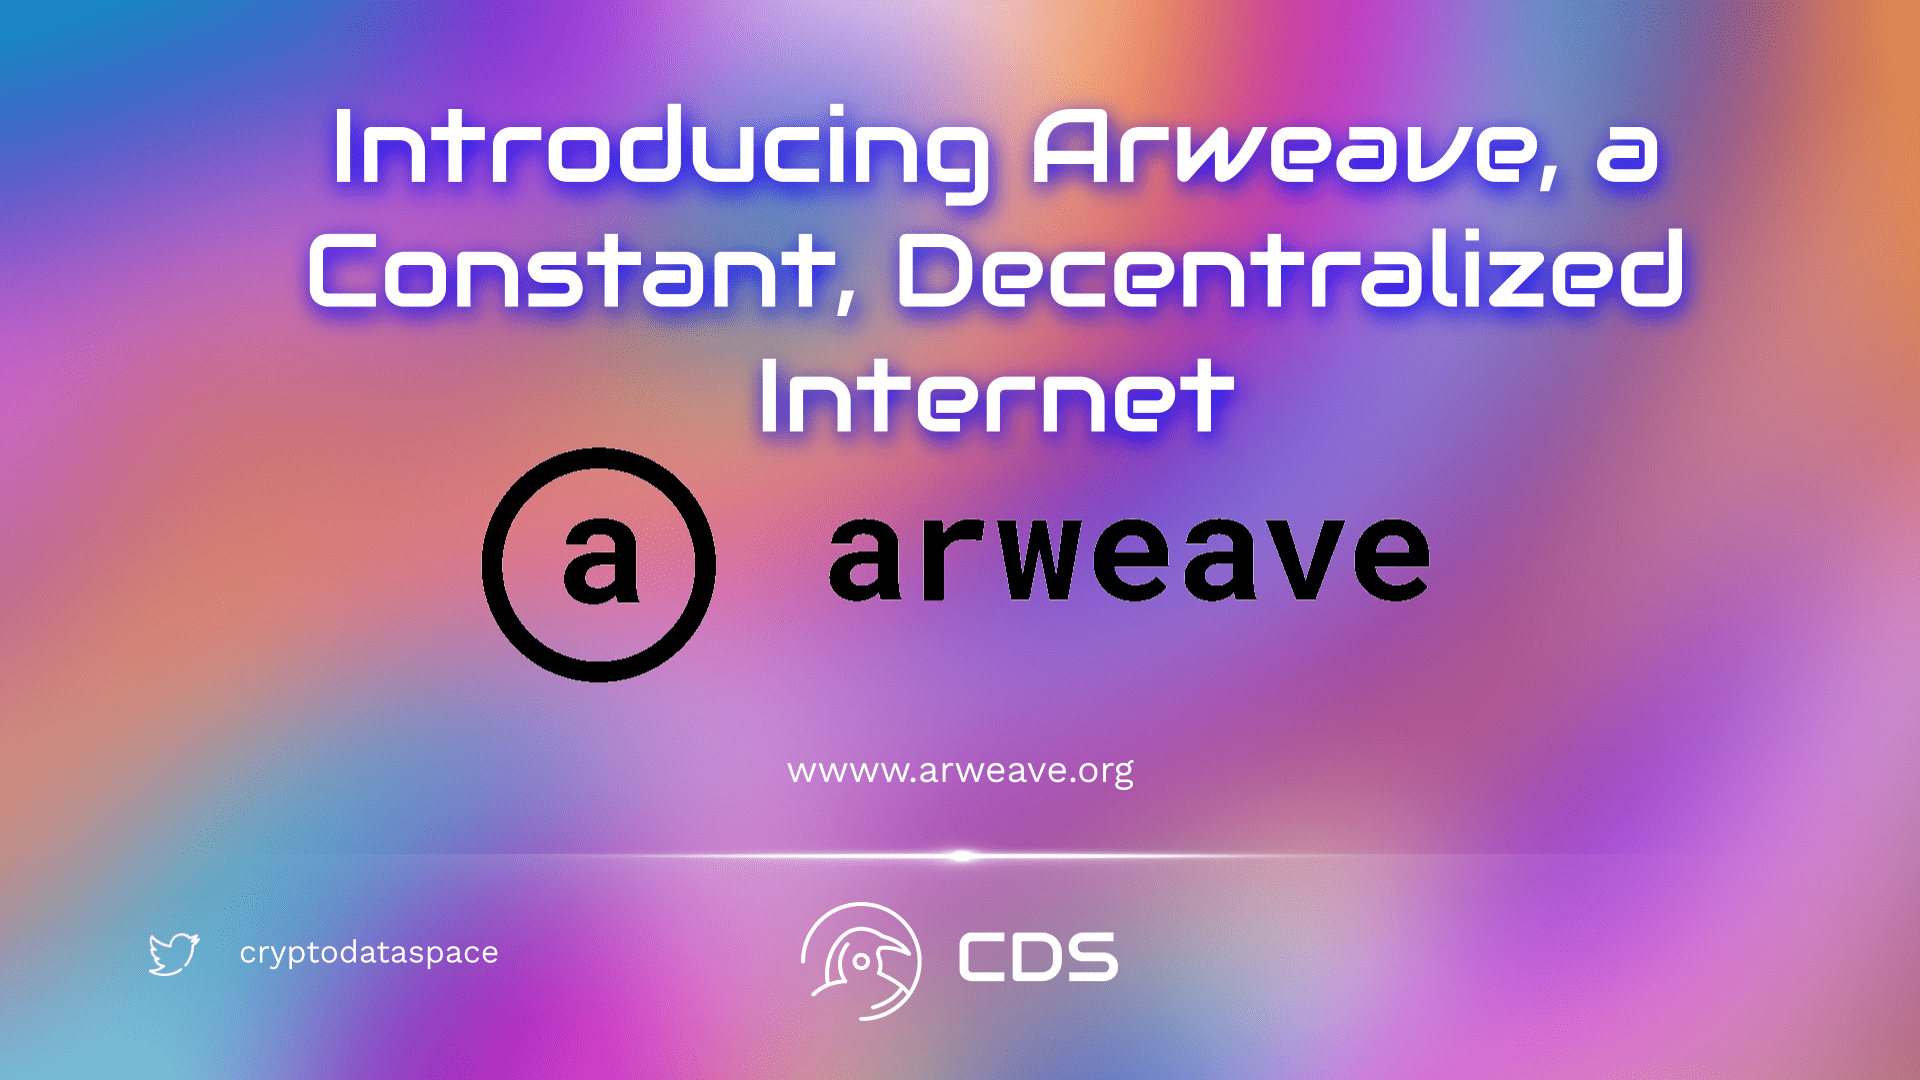 Introducing Arweave, a Constant, Decentralized Internet